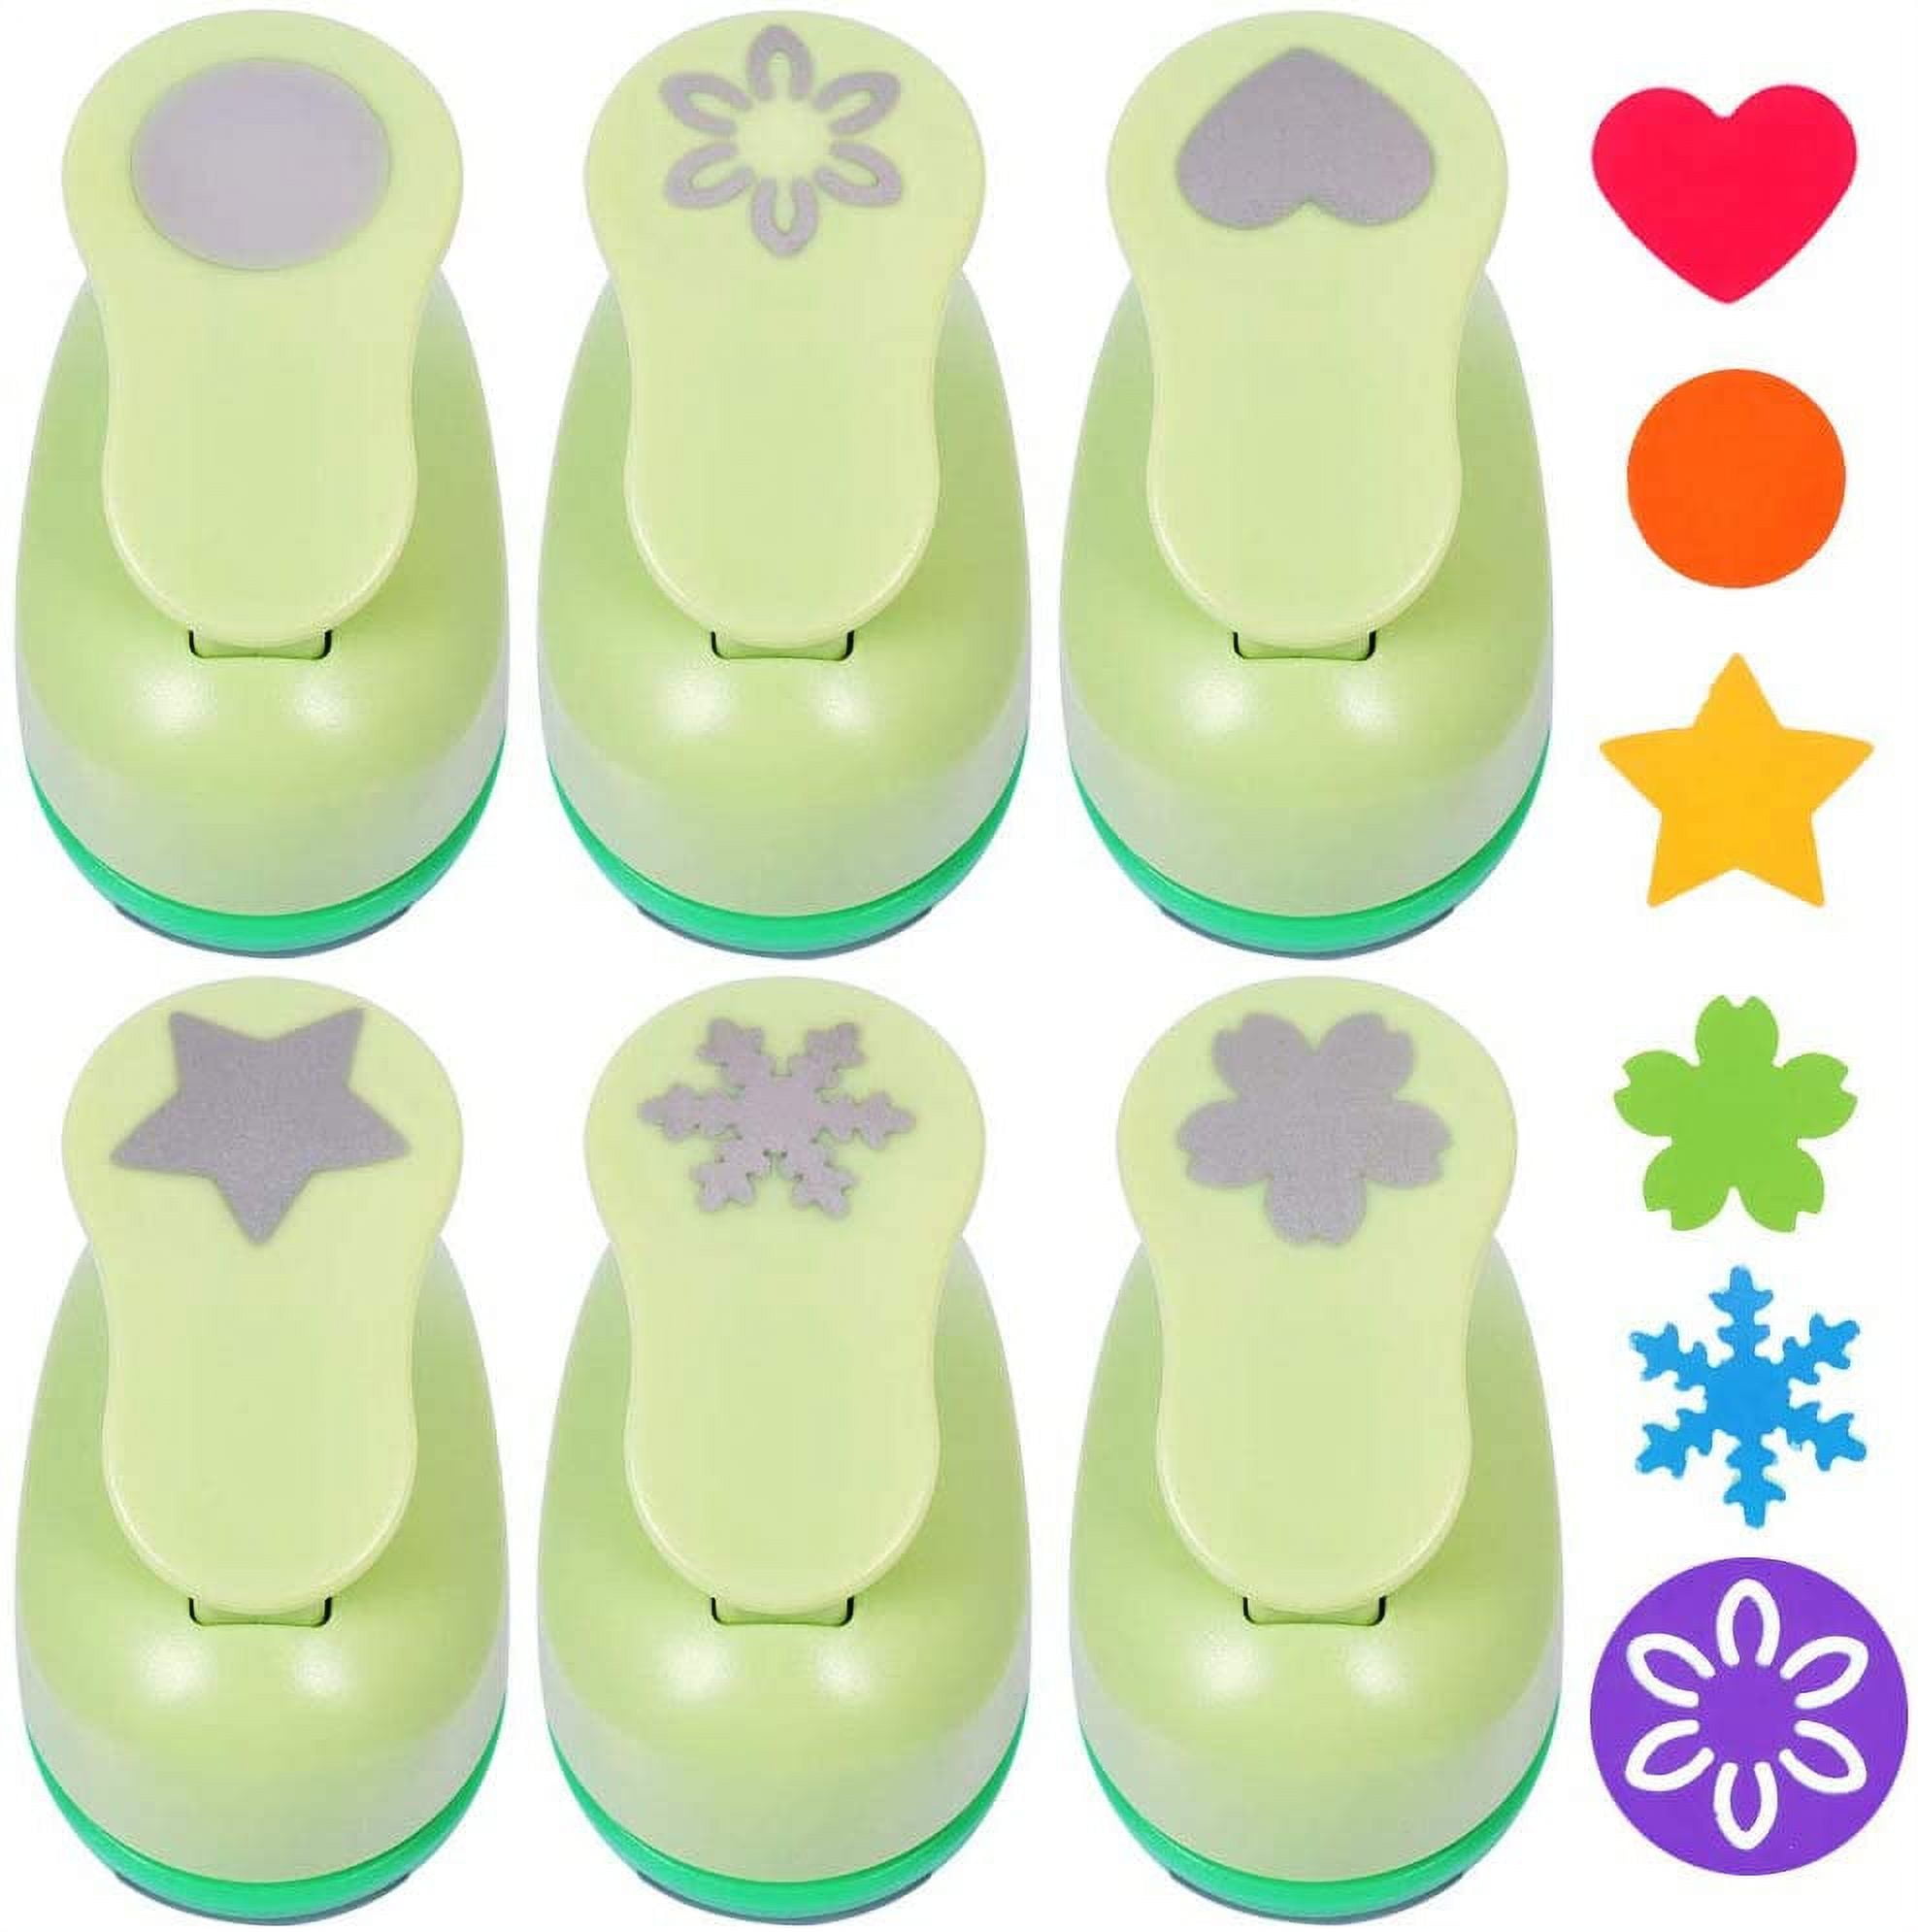 6 PCS Craft Hole Punch Paper Punch Handmade Hole Scrapbook Punchers 0.6  Inch Different Shape Crafting Designs for Kids Paper Crafts, Card Making,  Scrapbooking Arts, Crafts & Sewing